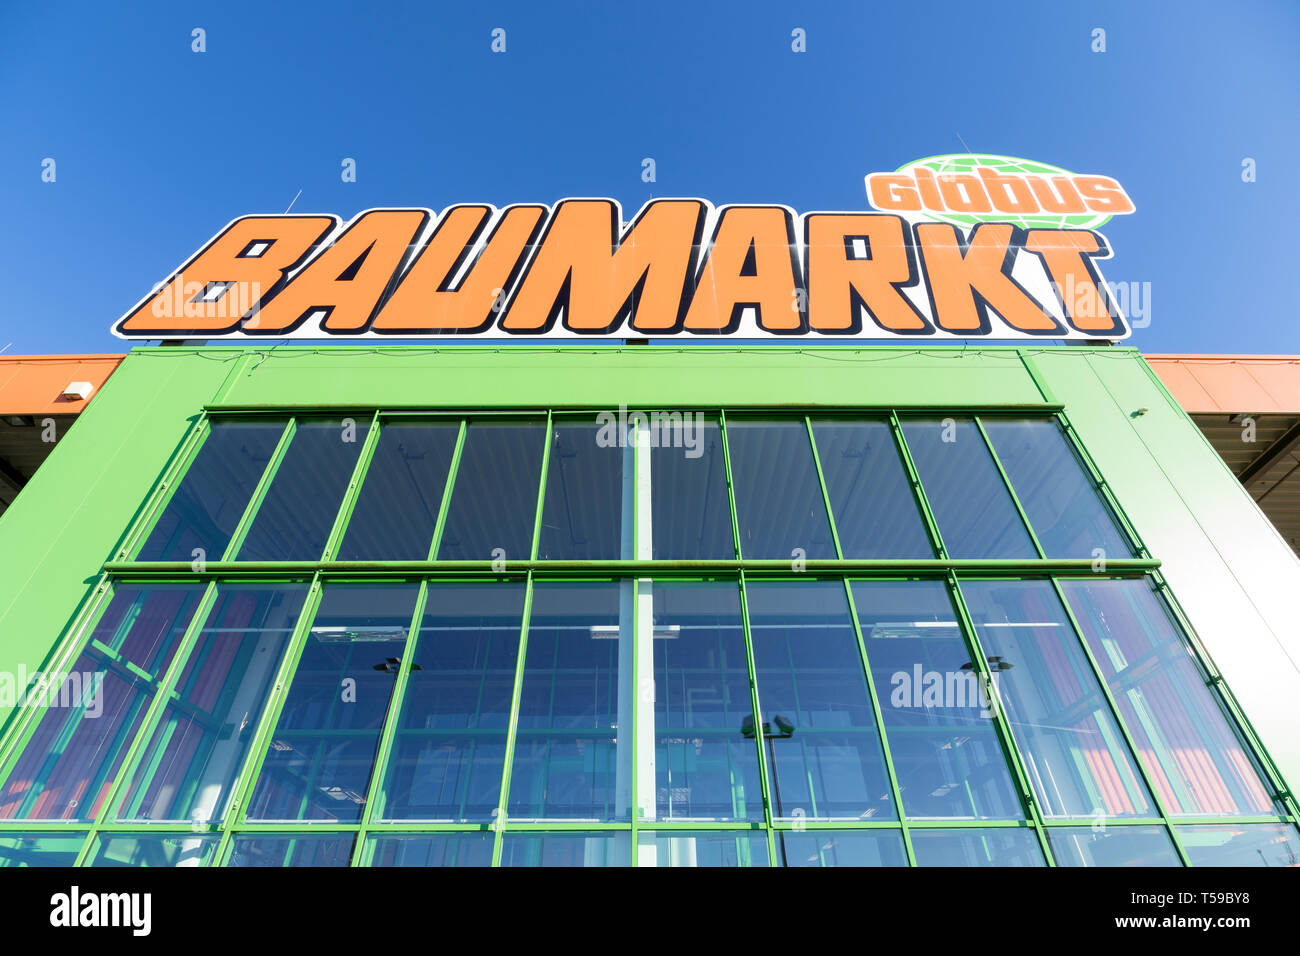 Globus sign at store. Globus is a German retail chain of hypermarkets, DIY stores and electronics stores - Alamy